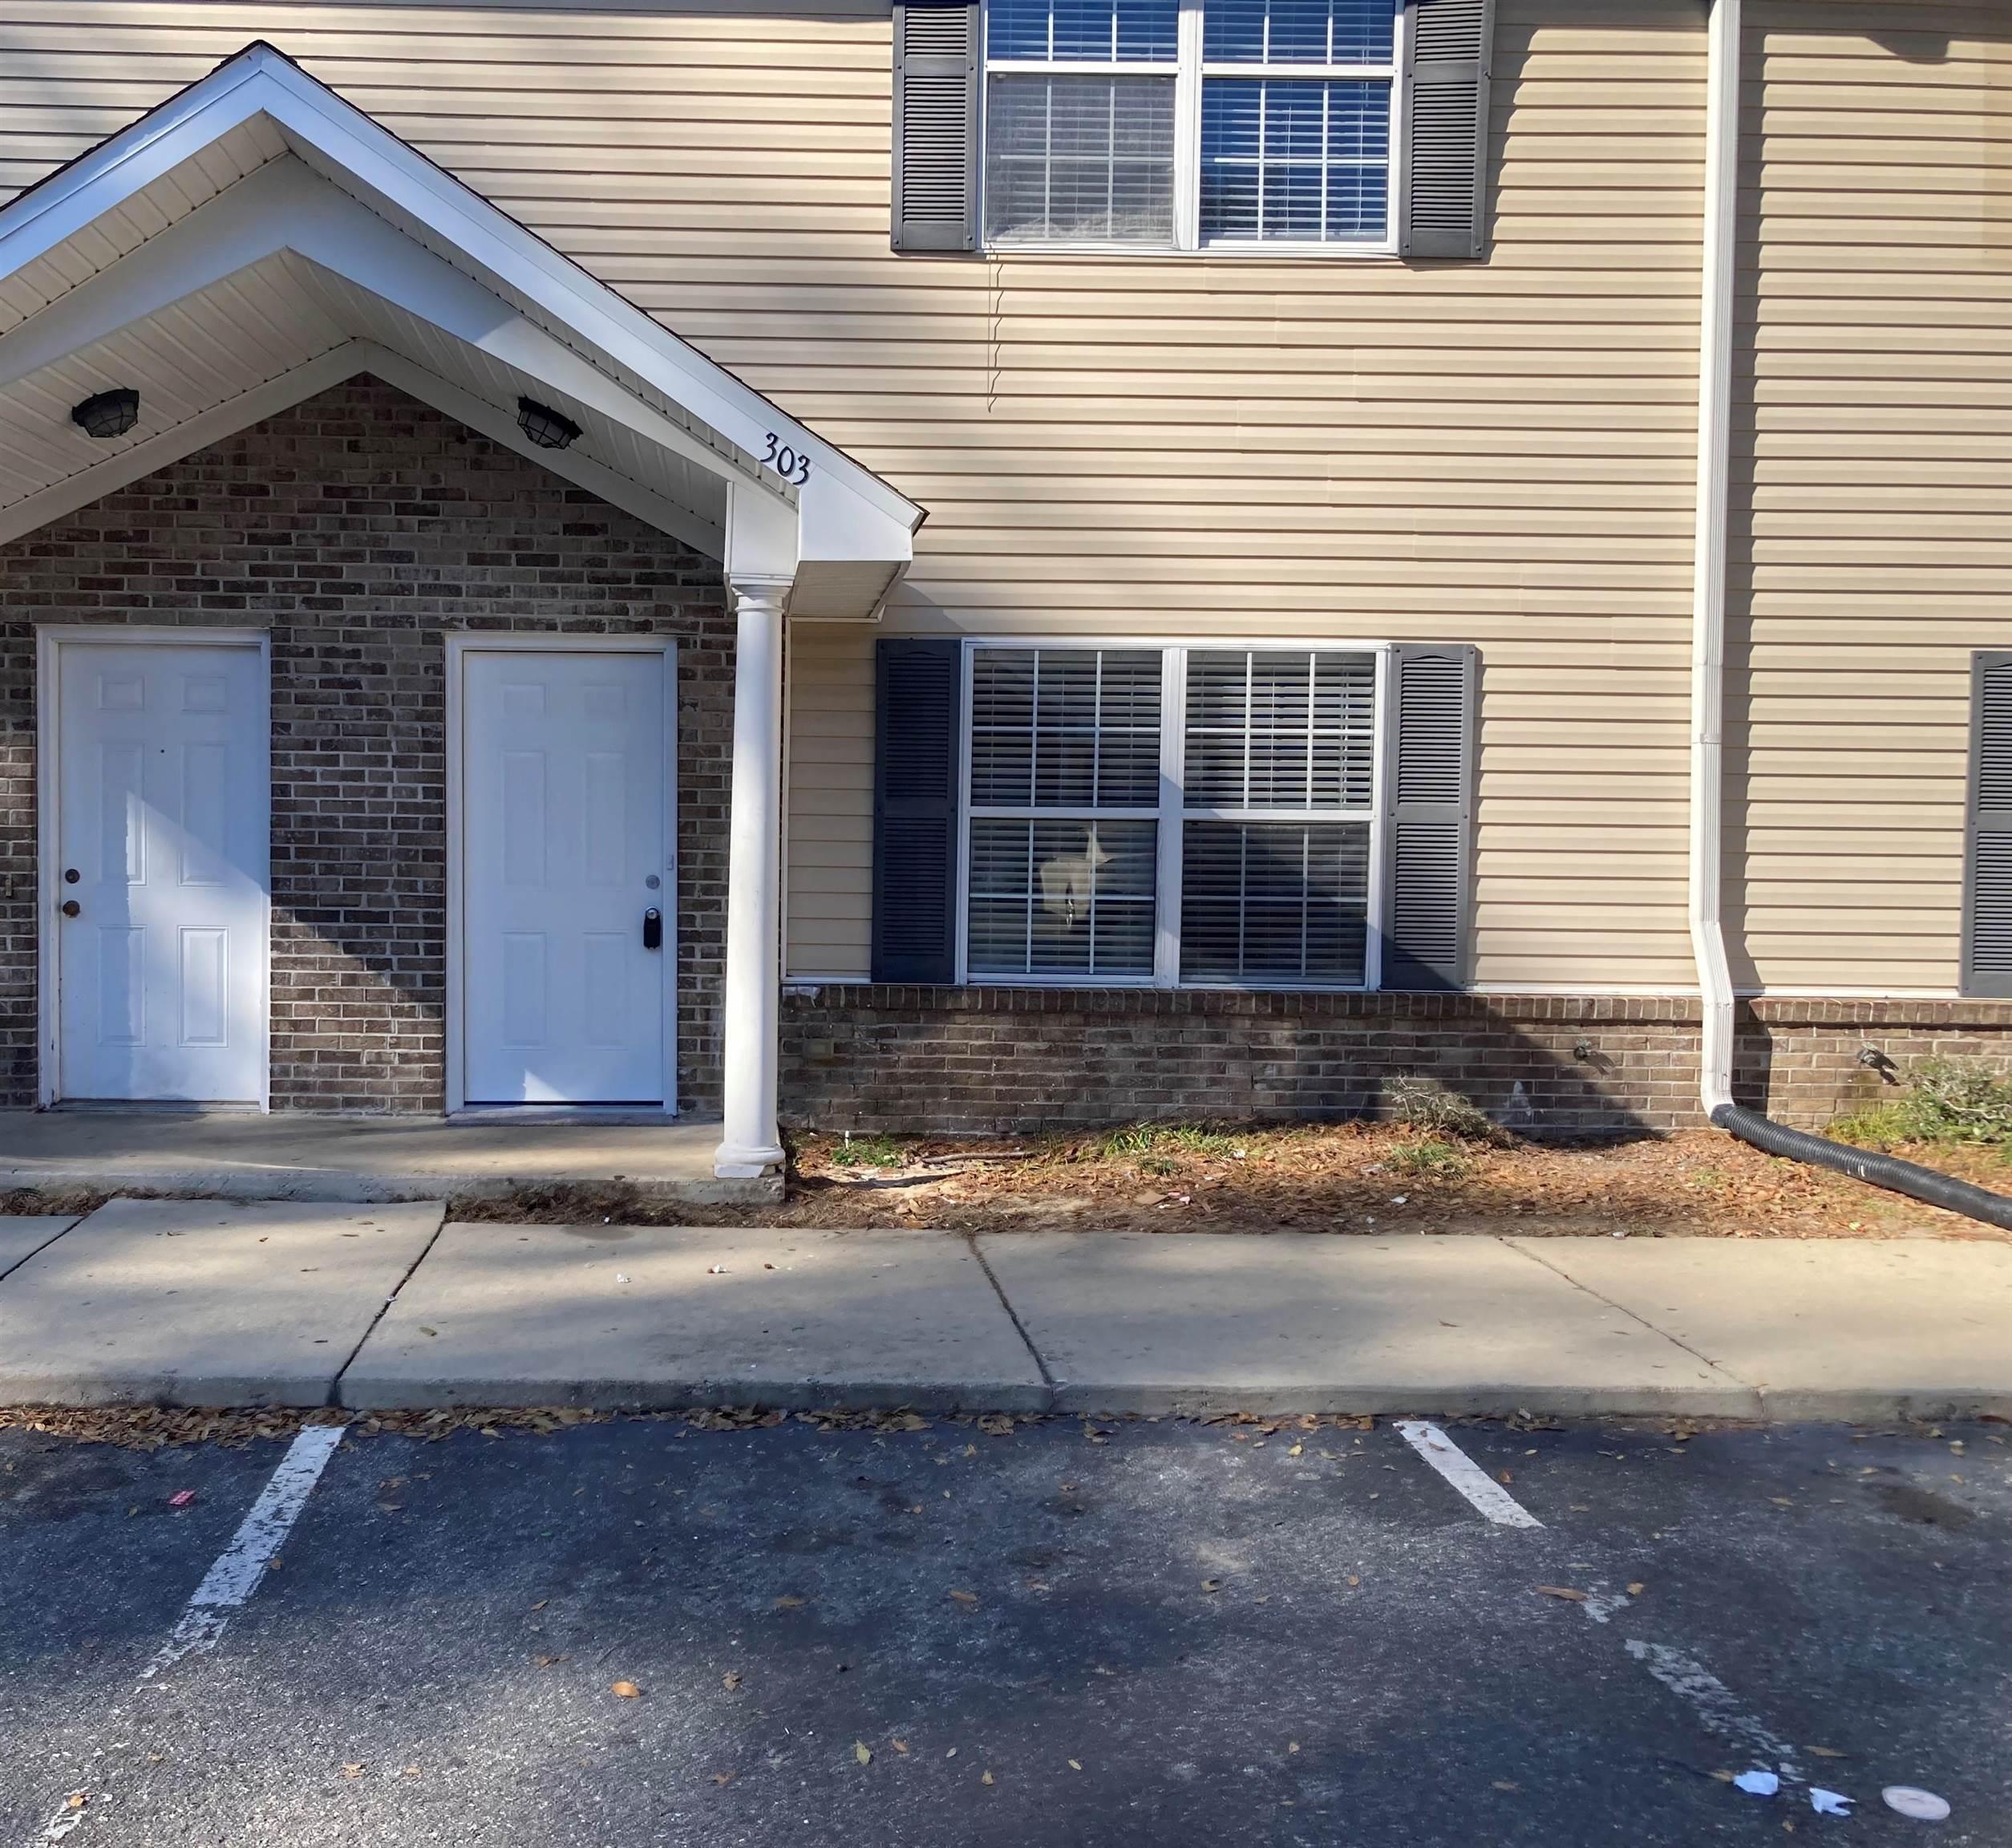 PRICE REDUCED! Super cute townhouse/condo. Back on  Market! Lenders refused to finance owner/occupant buyer. Due to the high Investor to Owner Occupant/ Ratio this Condominium is deemed non-warrantable for owner/ occupant buyers. Current HOA fees are charged at $600 per quarter,( equaling $2,400 annual which is $200 per month).  Quiet area. Off Campus though still close to FSU, TCC, and FAMU. Minutes from the Capital and I-10. Convenient for shopping, social, recreation activities, dining and entertainment. This home features a new dishwasher, new refrigerator, new countertops, new kitchen cabinets, new carpet, new light fixtures, new ceiling fans, new bathroom vanities as well as a new entry door. Take note, the current furnishing as well as the gorgeous interior decorations come with the house. The mattress on the bed is an air mattress.